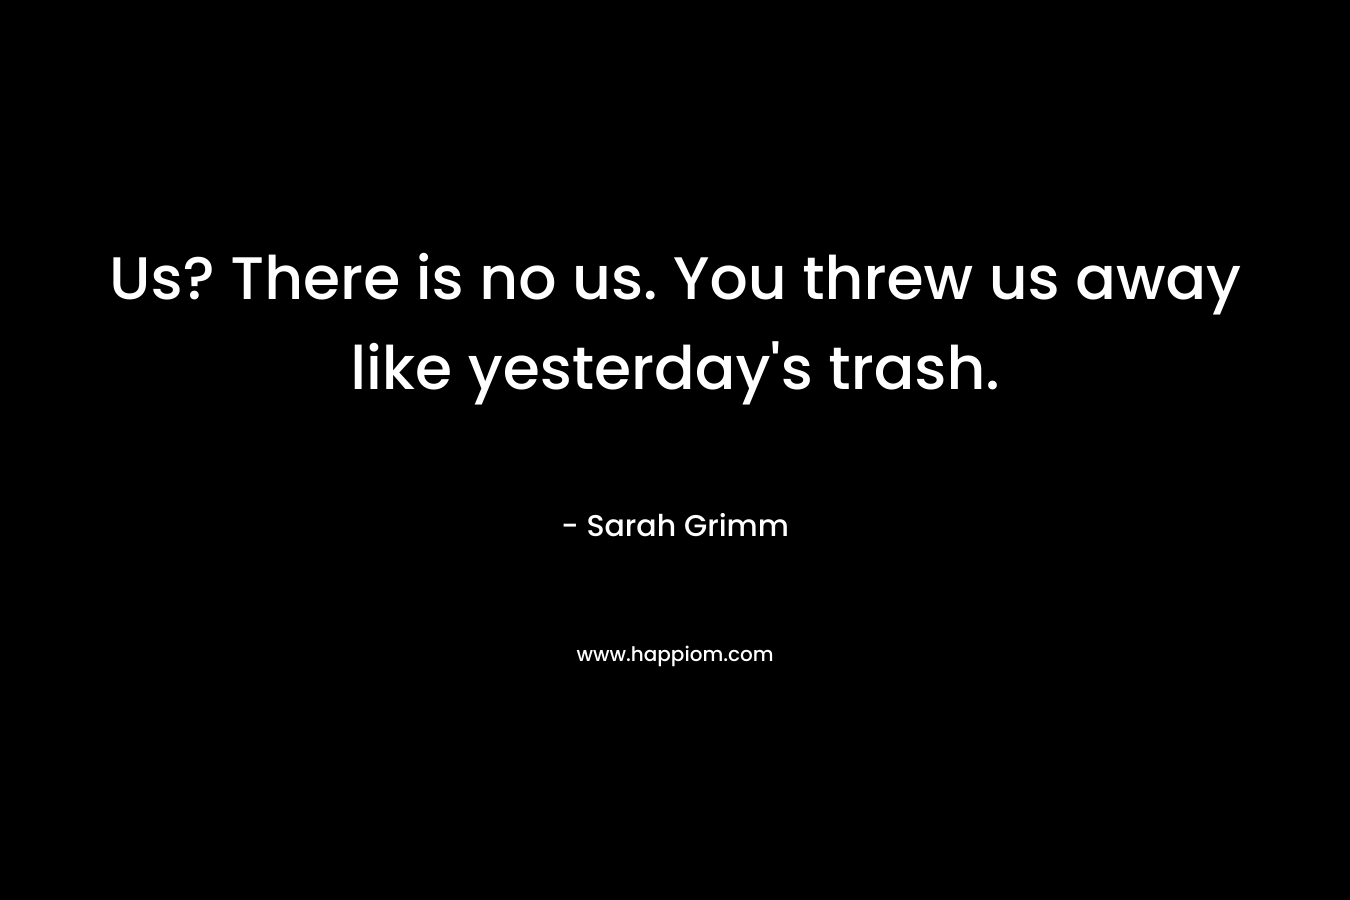 Us? There is no us. You threw us away like yesterday’s trash. – Sarah Grimm